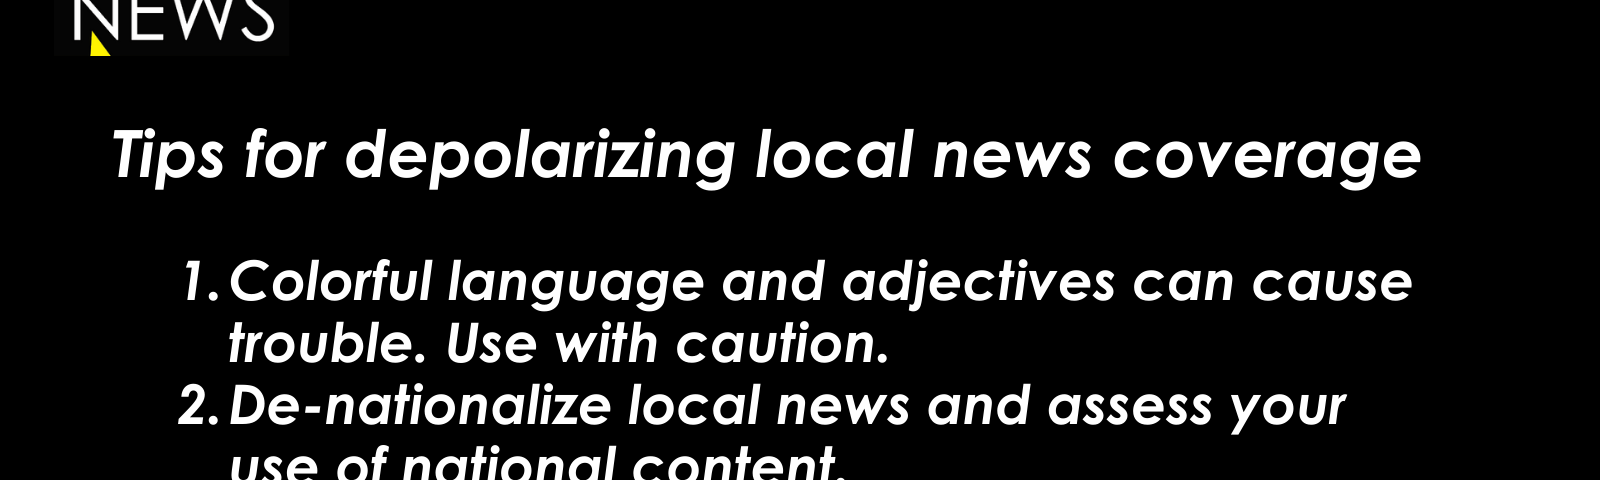 Tips for de-polarizing local news coverage: Colorful language and adjectives can cause trouble. Use with caution. De-nationalize local news and assess your use of national content. Remember that most Americans are non-ideological.